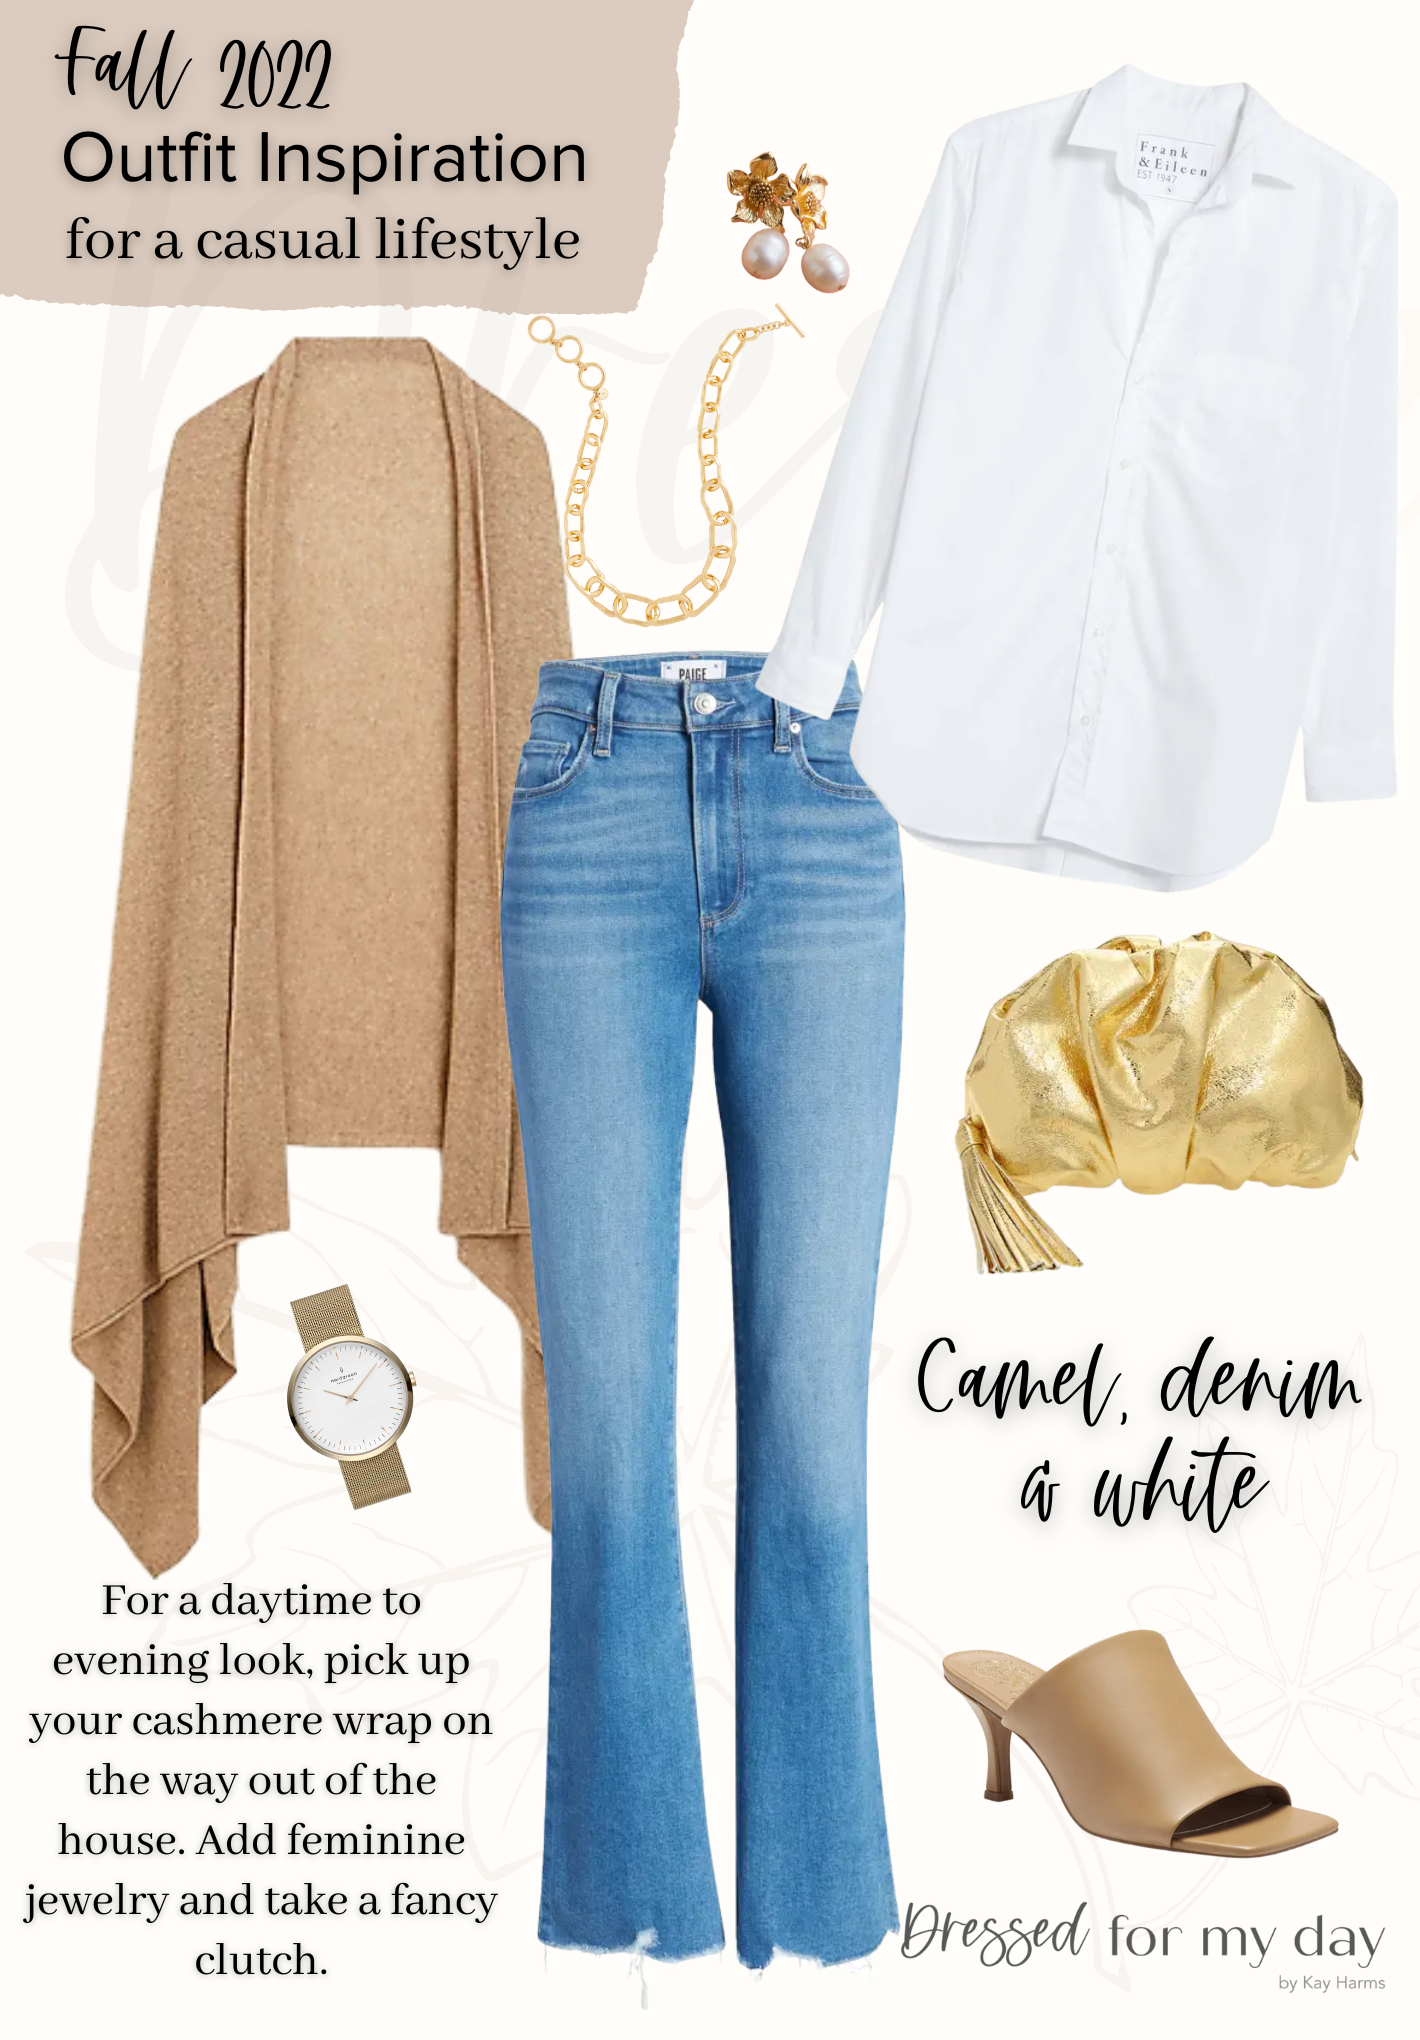 Camel and white and denim